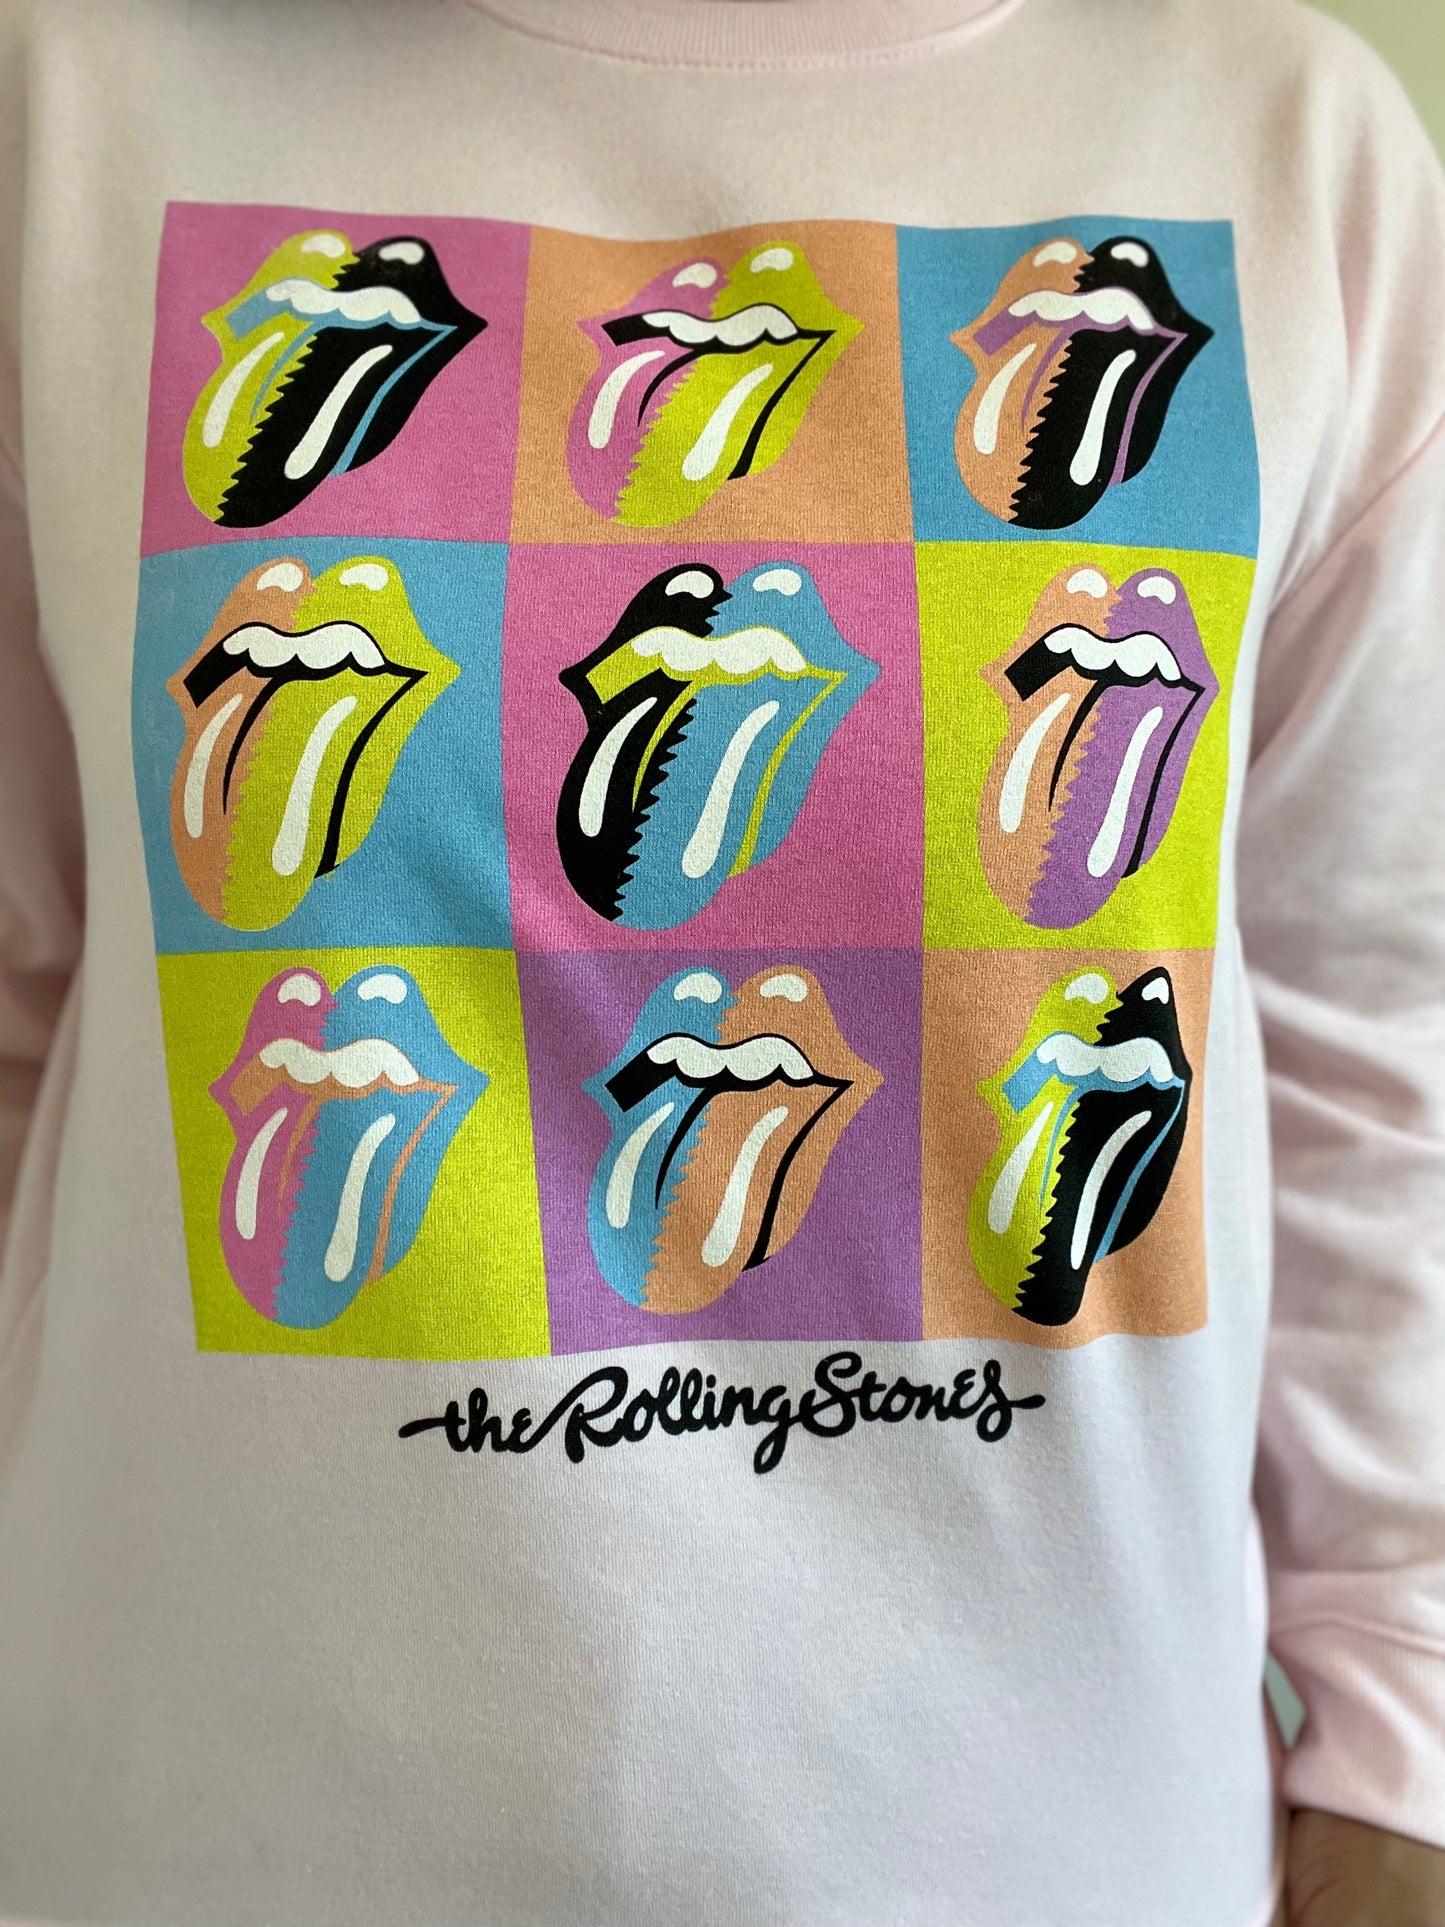 Rolling Stones x Andy Warhol Sweater - Size M